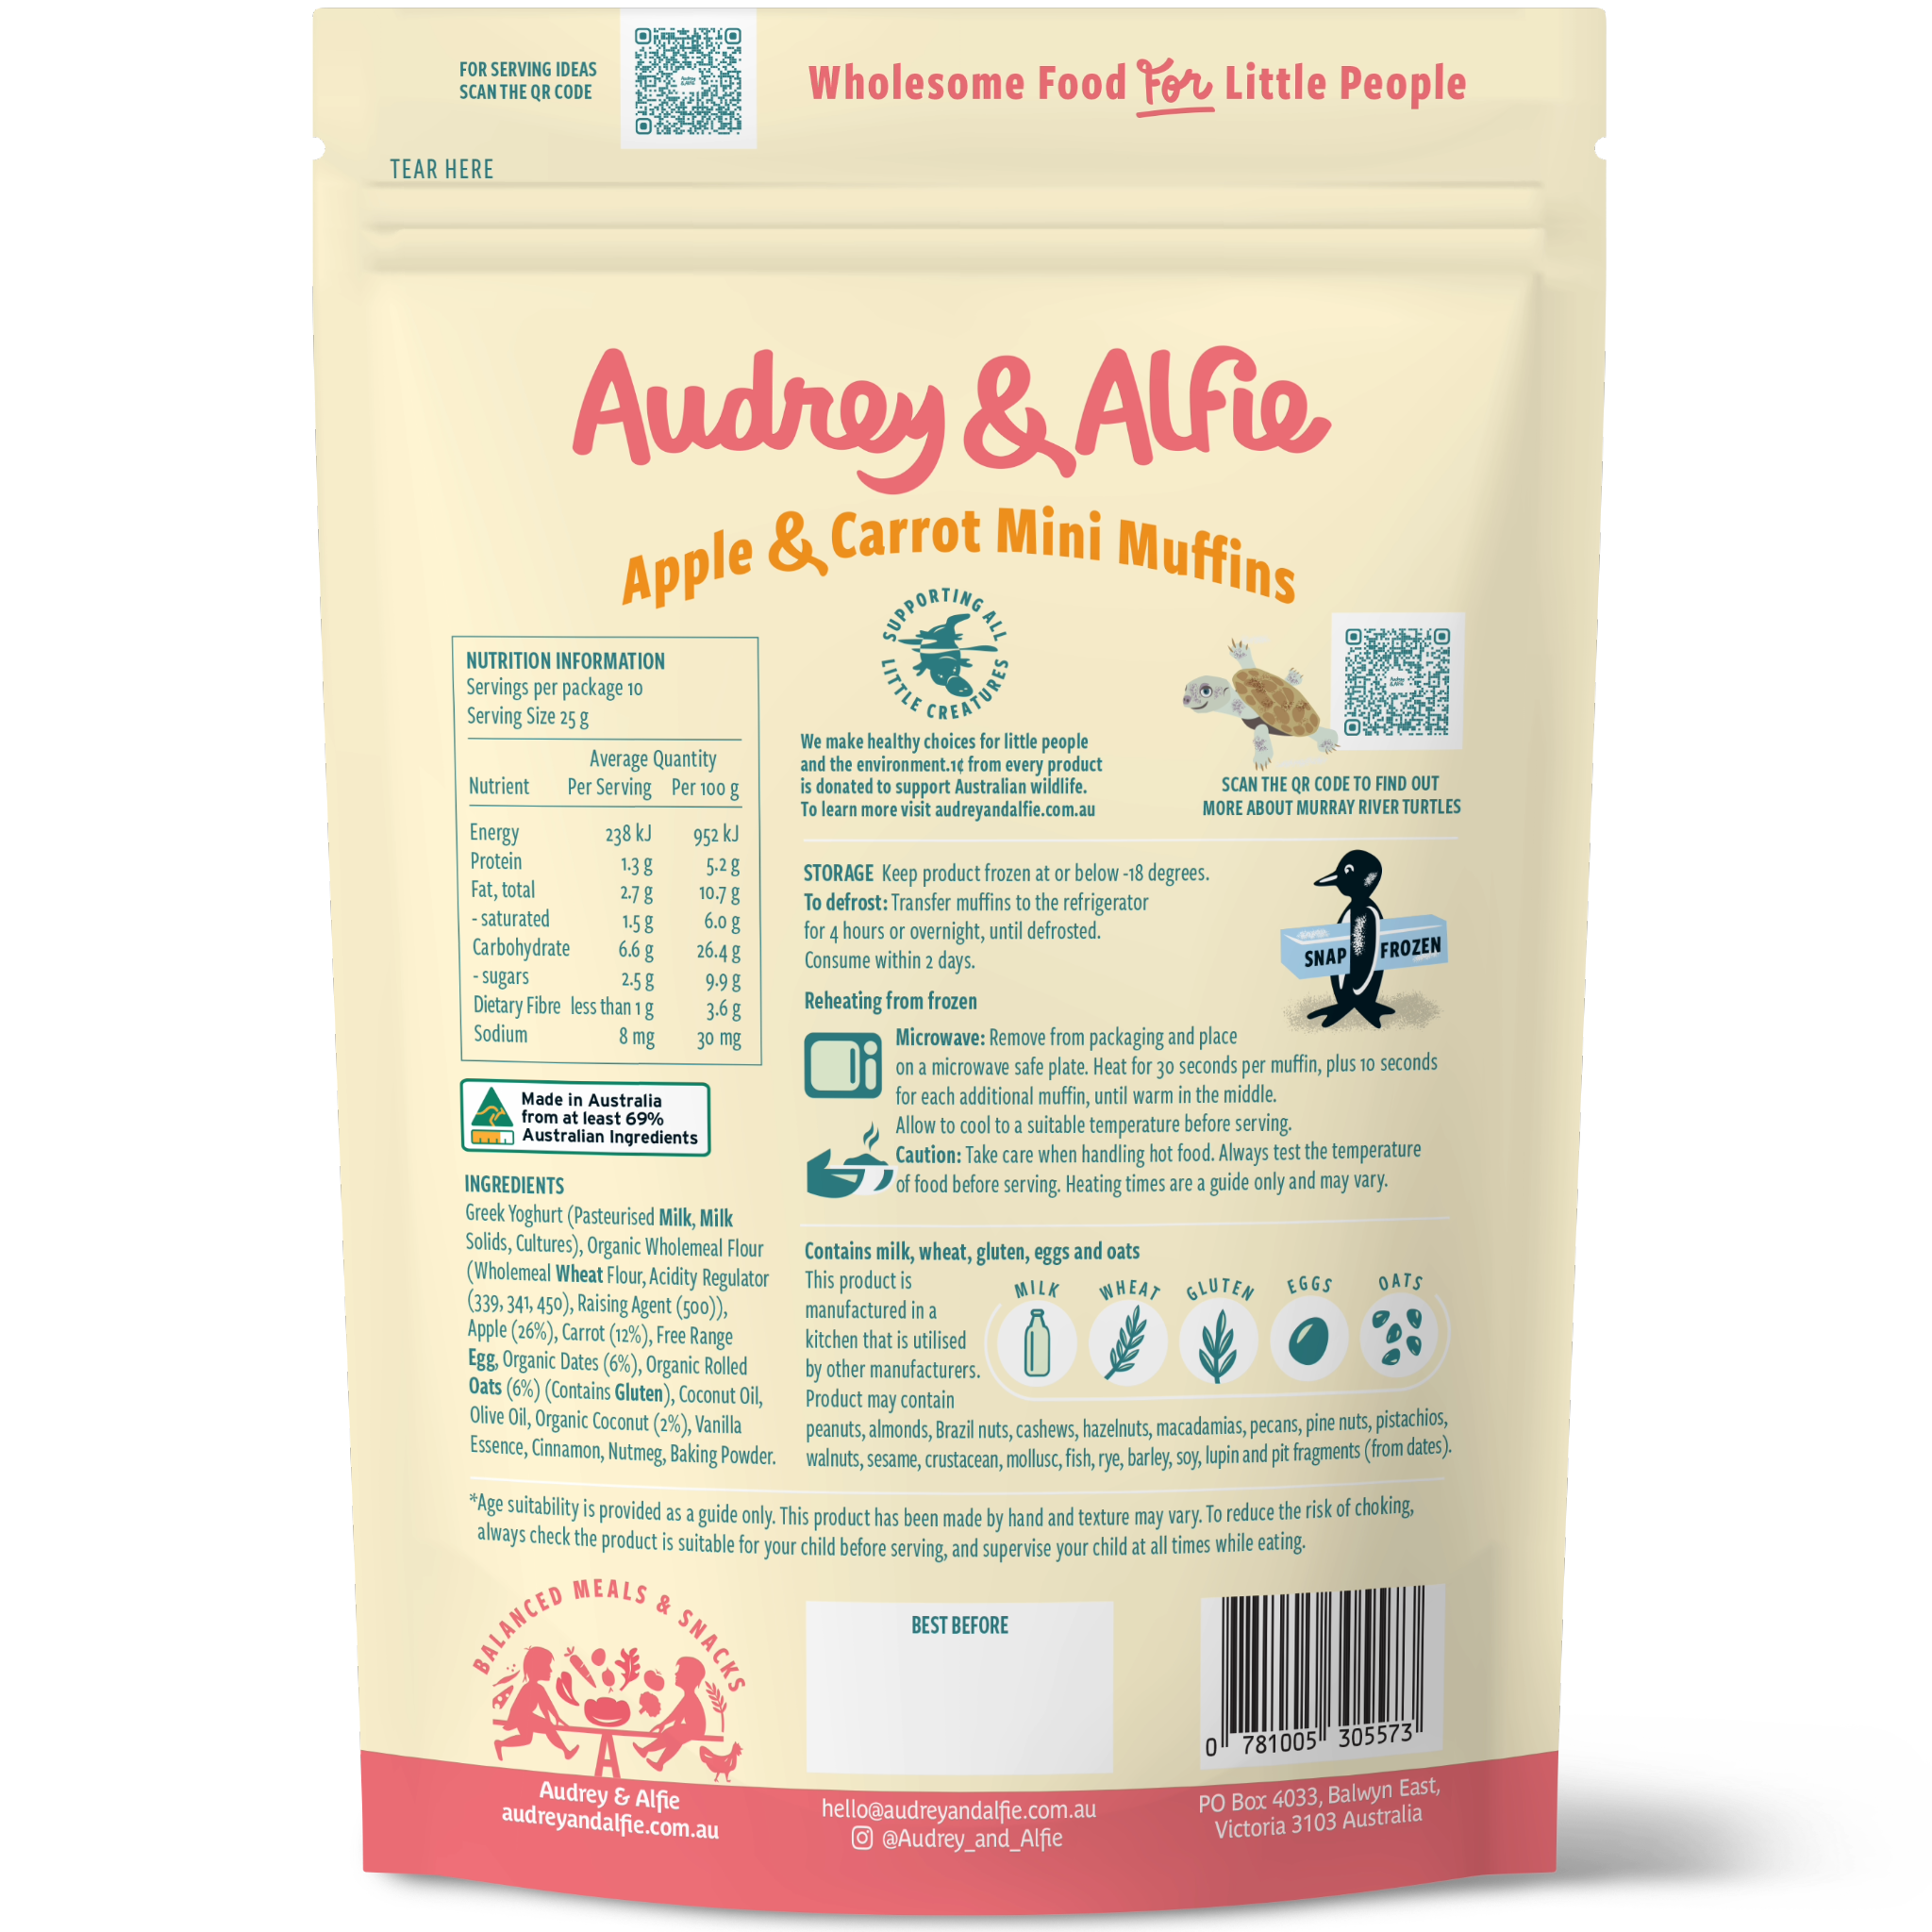 Apple & Carrot Mini Muffins from Audrey and Alfie - Back of Packet with Nutrition Information Panel